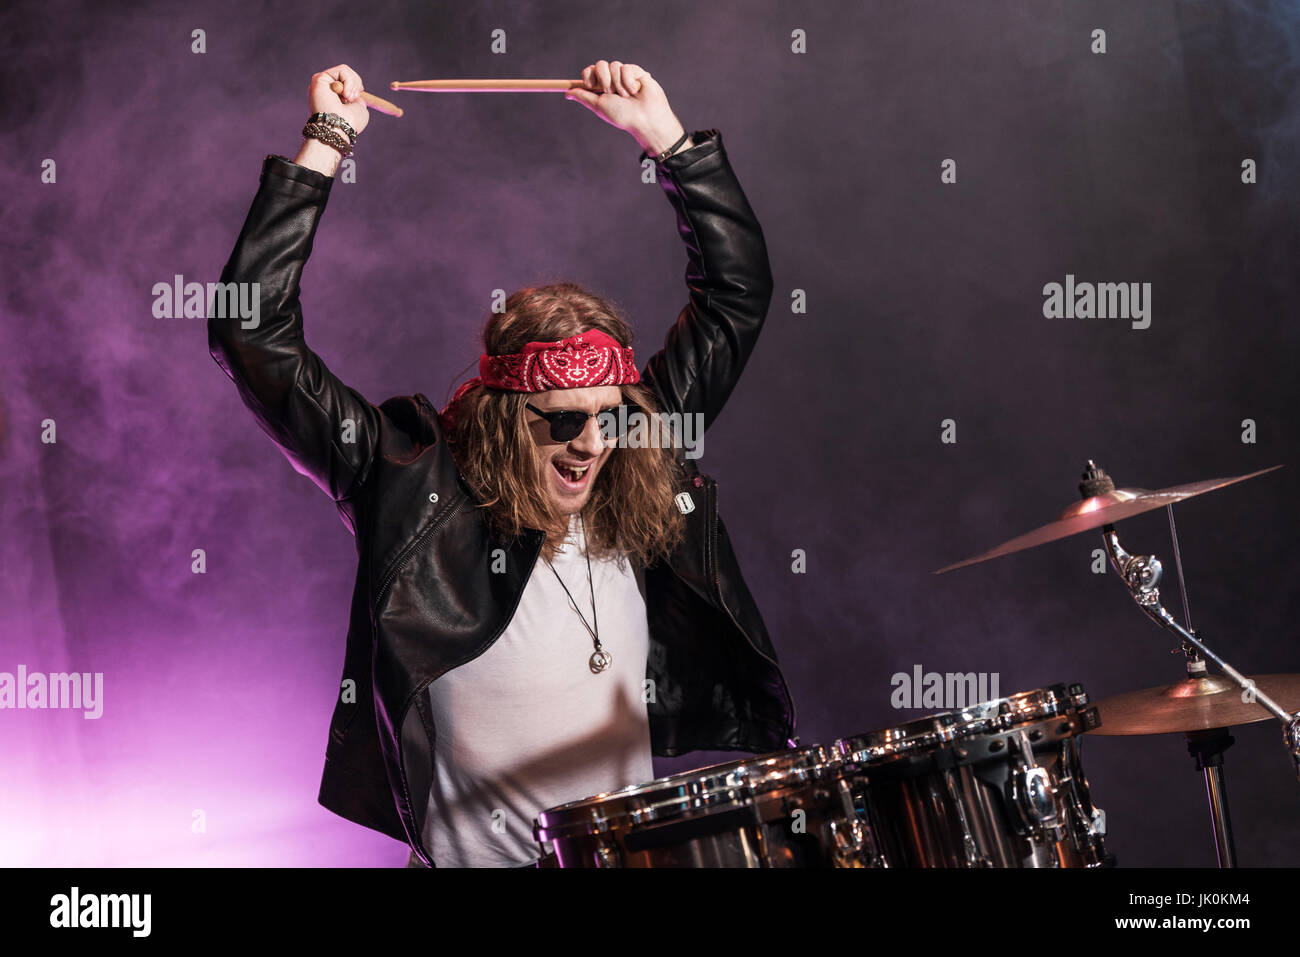 Handsome young man playing hard rock music with drums set Stock Photo